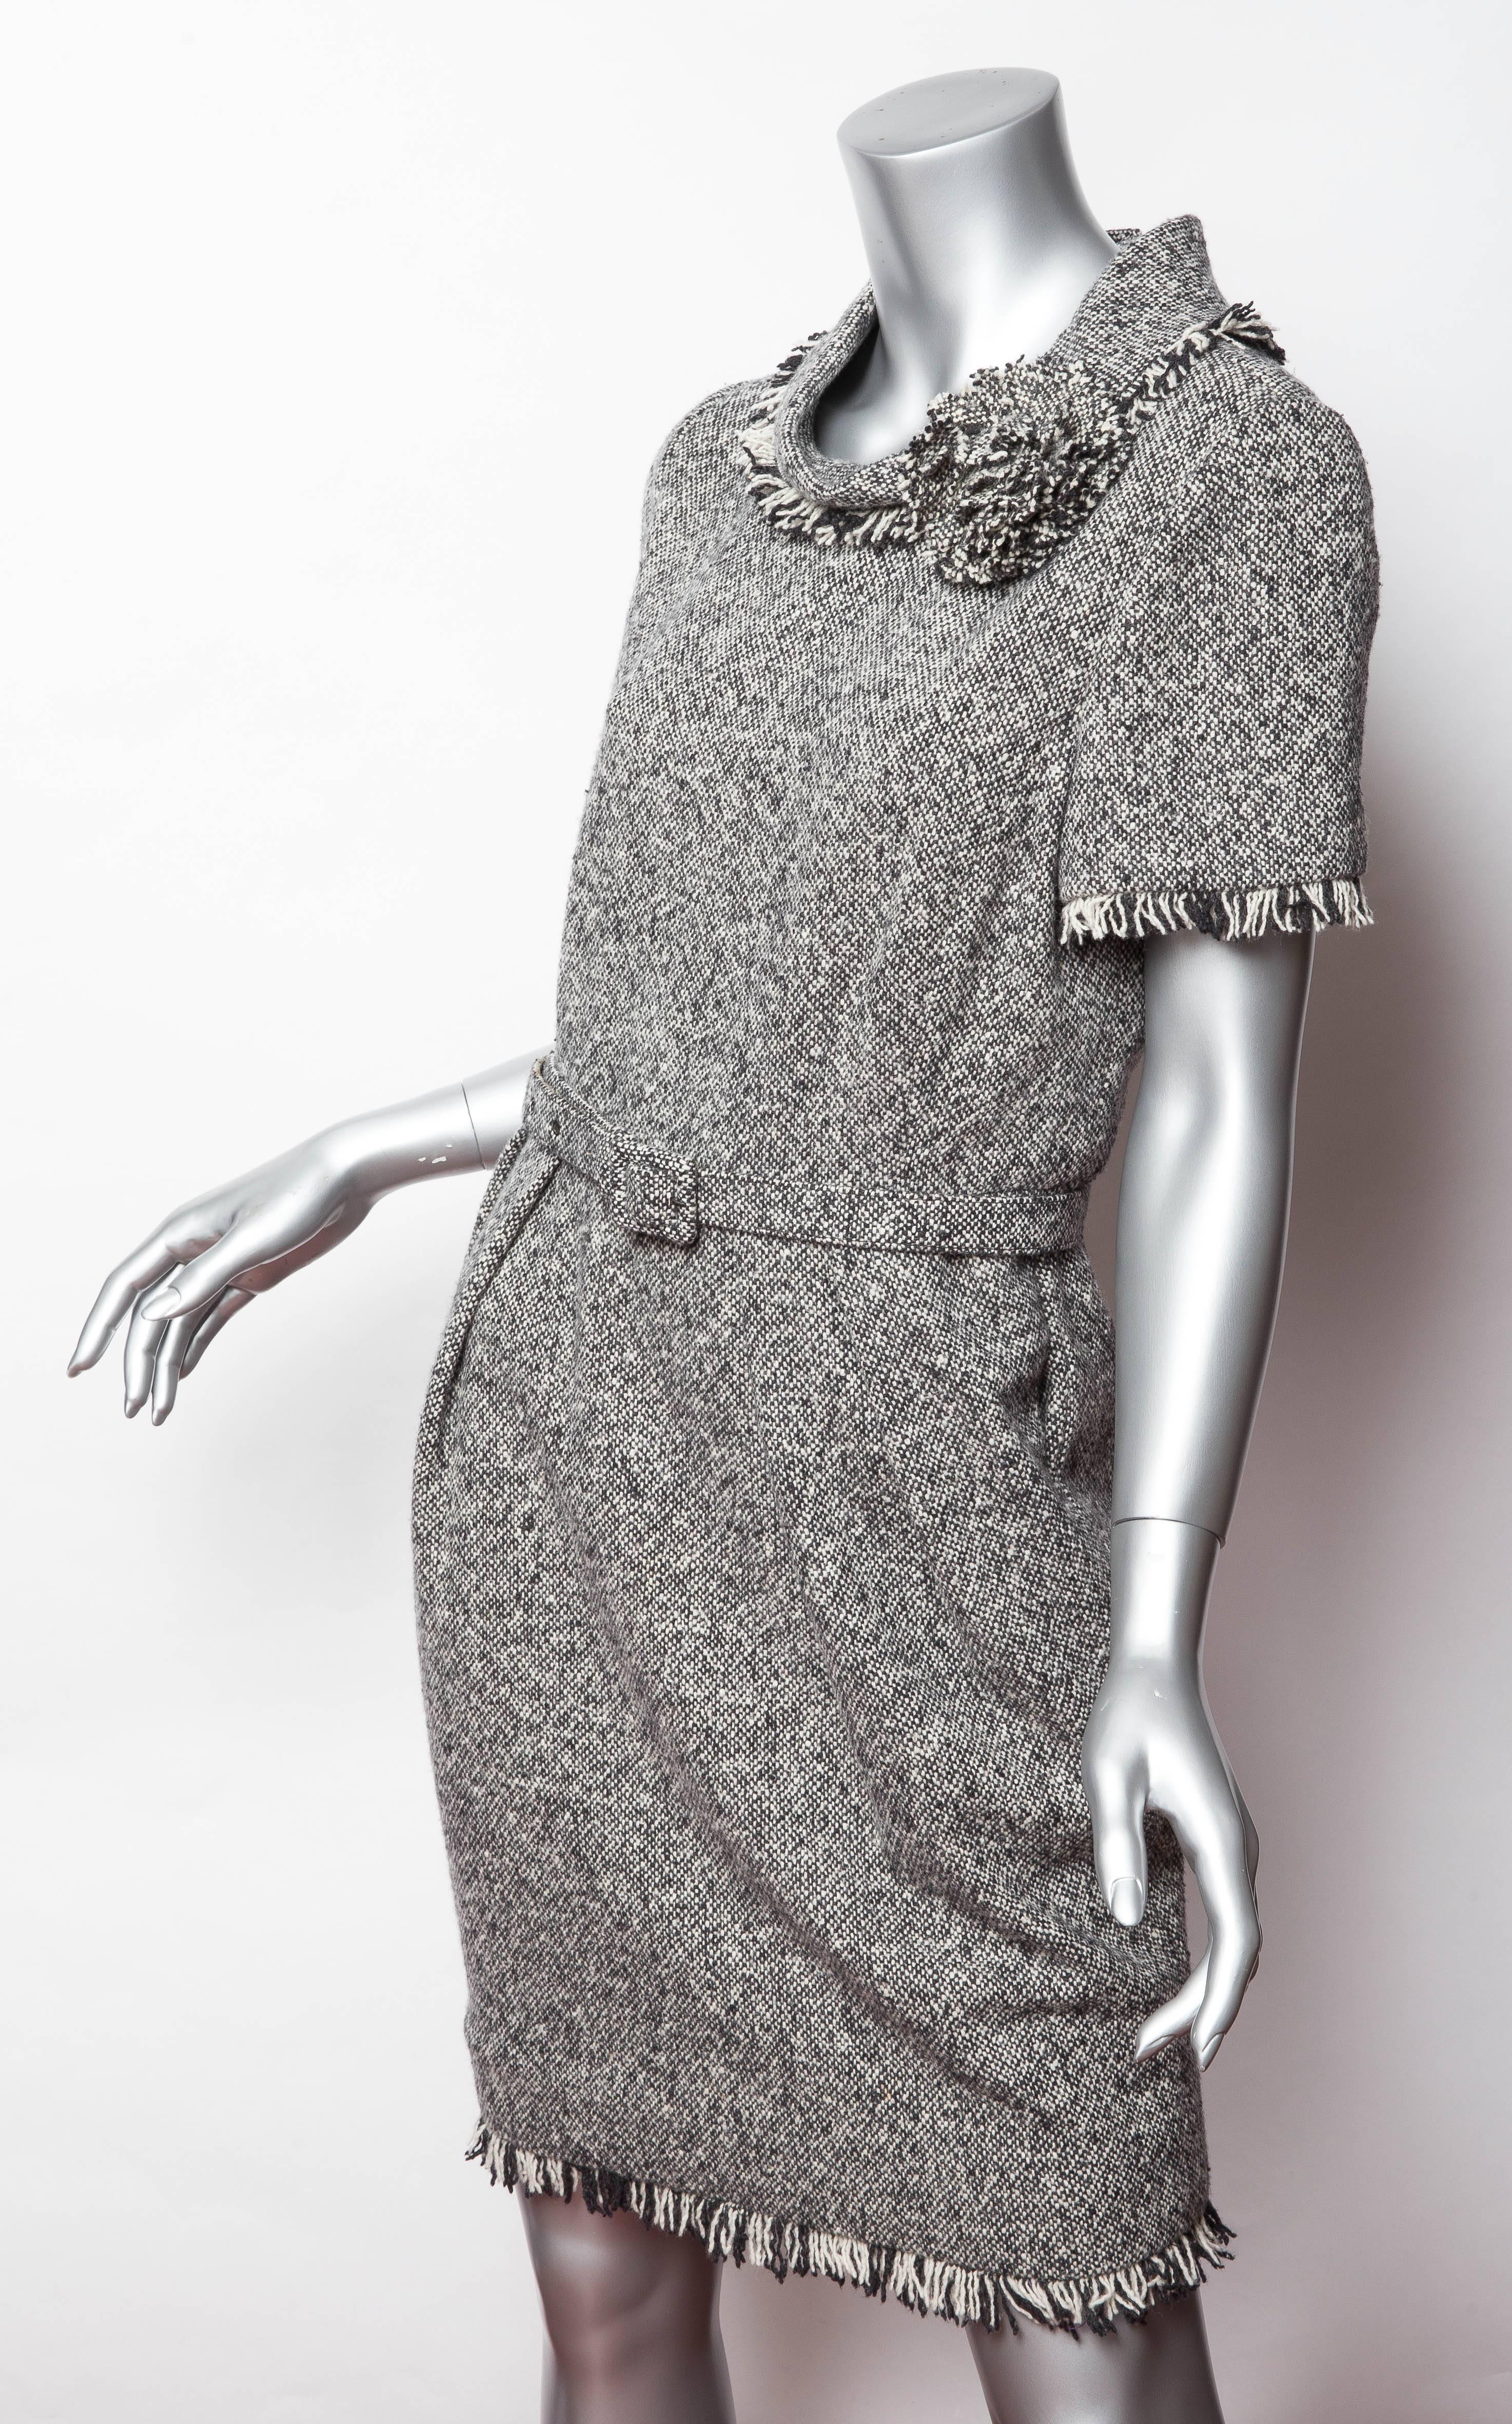 Very chic tweed short sleeved dress with cowl neck and corsage detail. Sleeves, hem and neck are trimmed with fringe. The bottom of the dress is slightly ruched to one side and an adjustable belt in the same fabric as the dress serves to highlight a